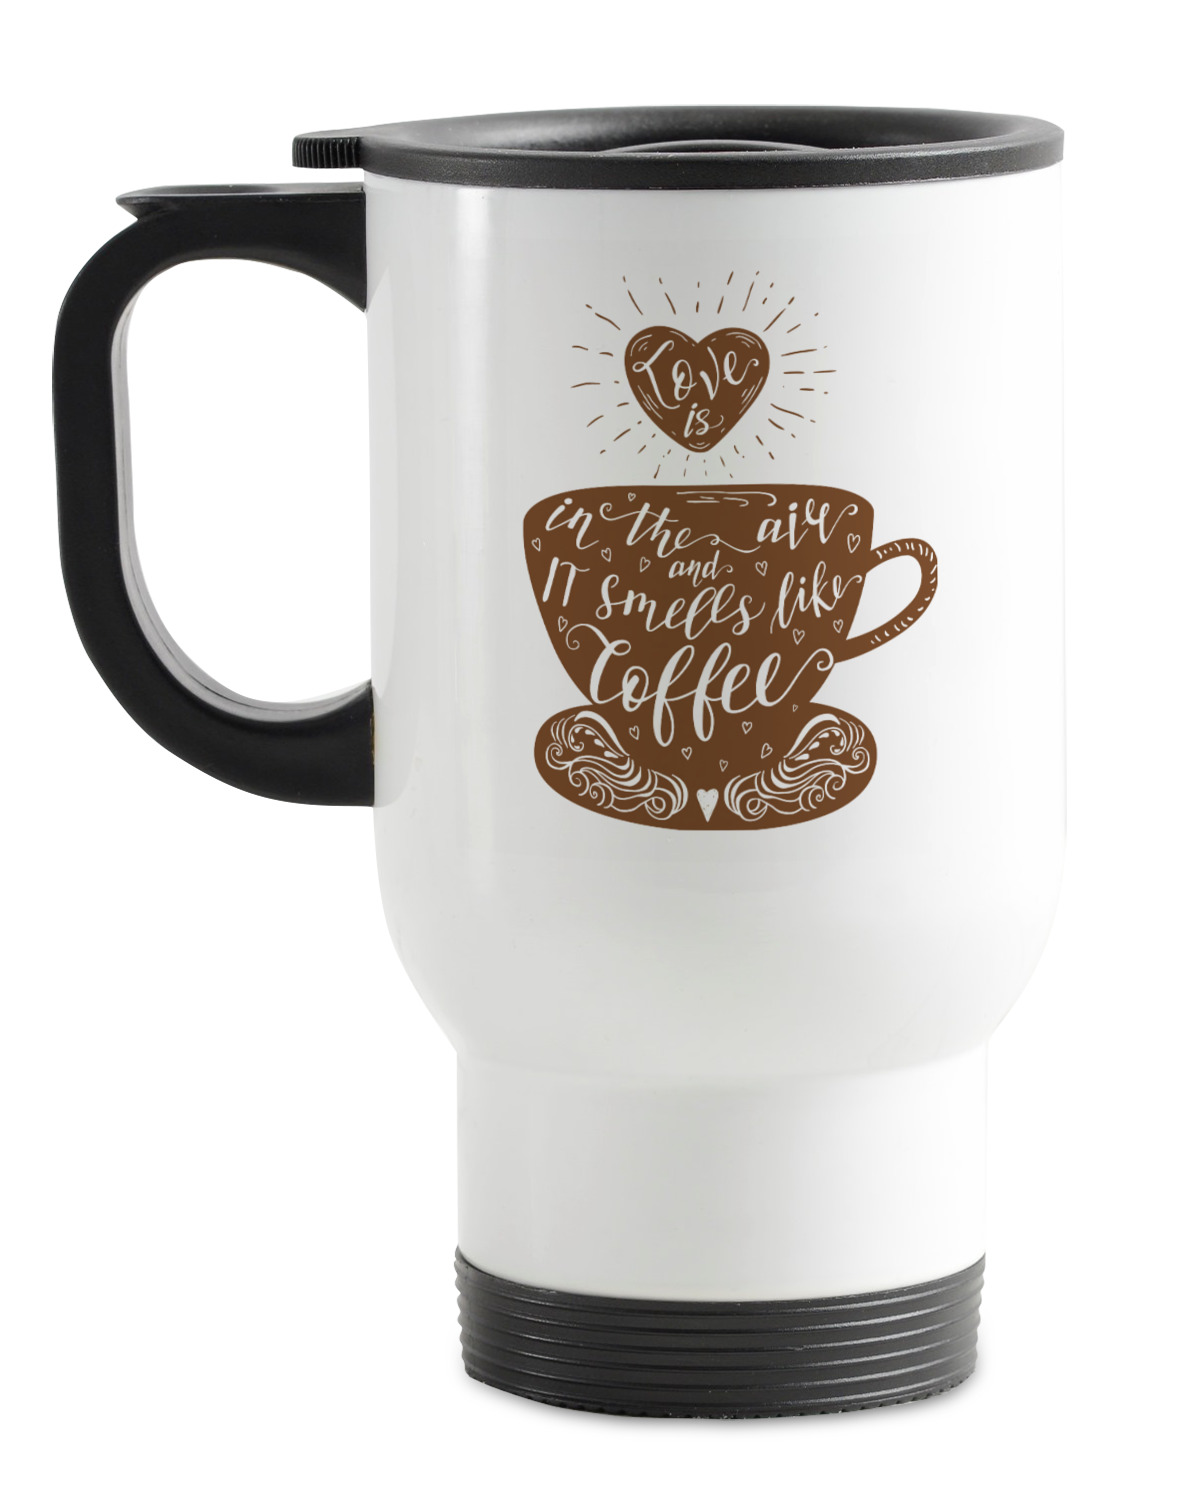 Personalized stainless steel Coffee thermos for the coffee lover